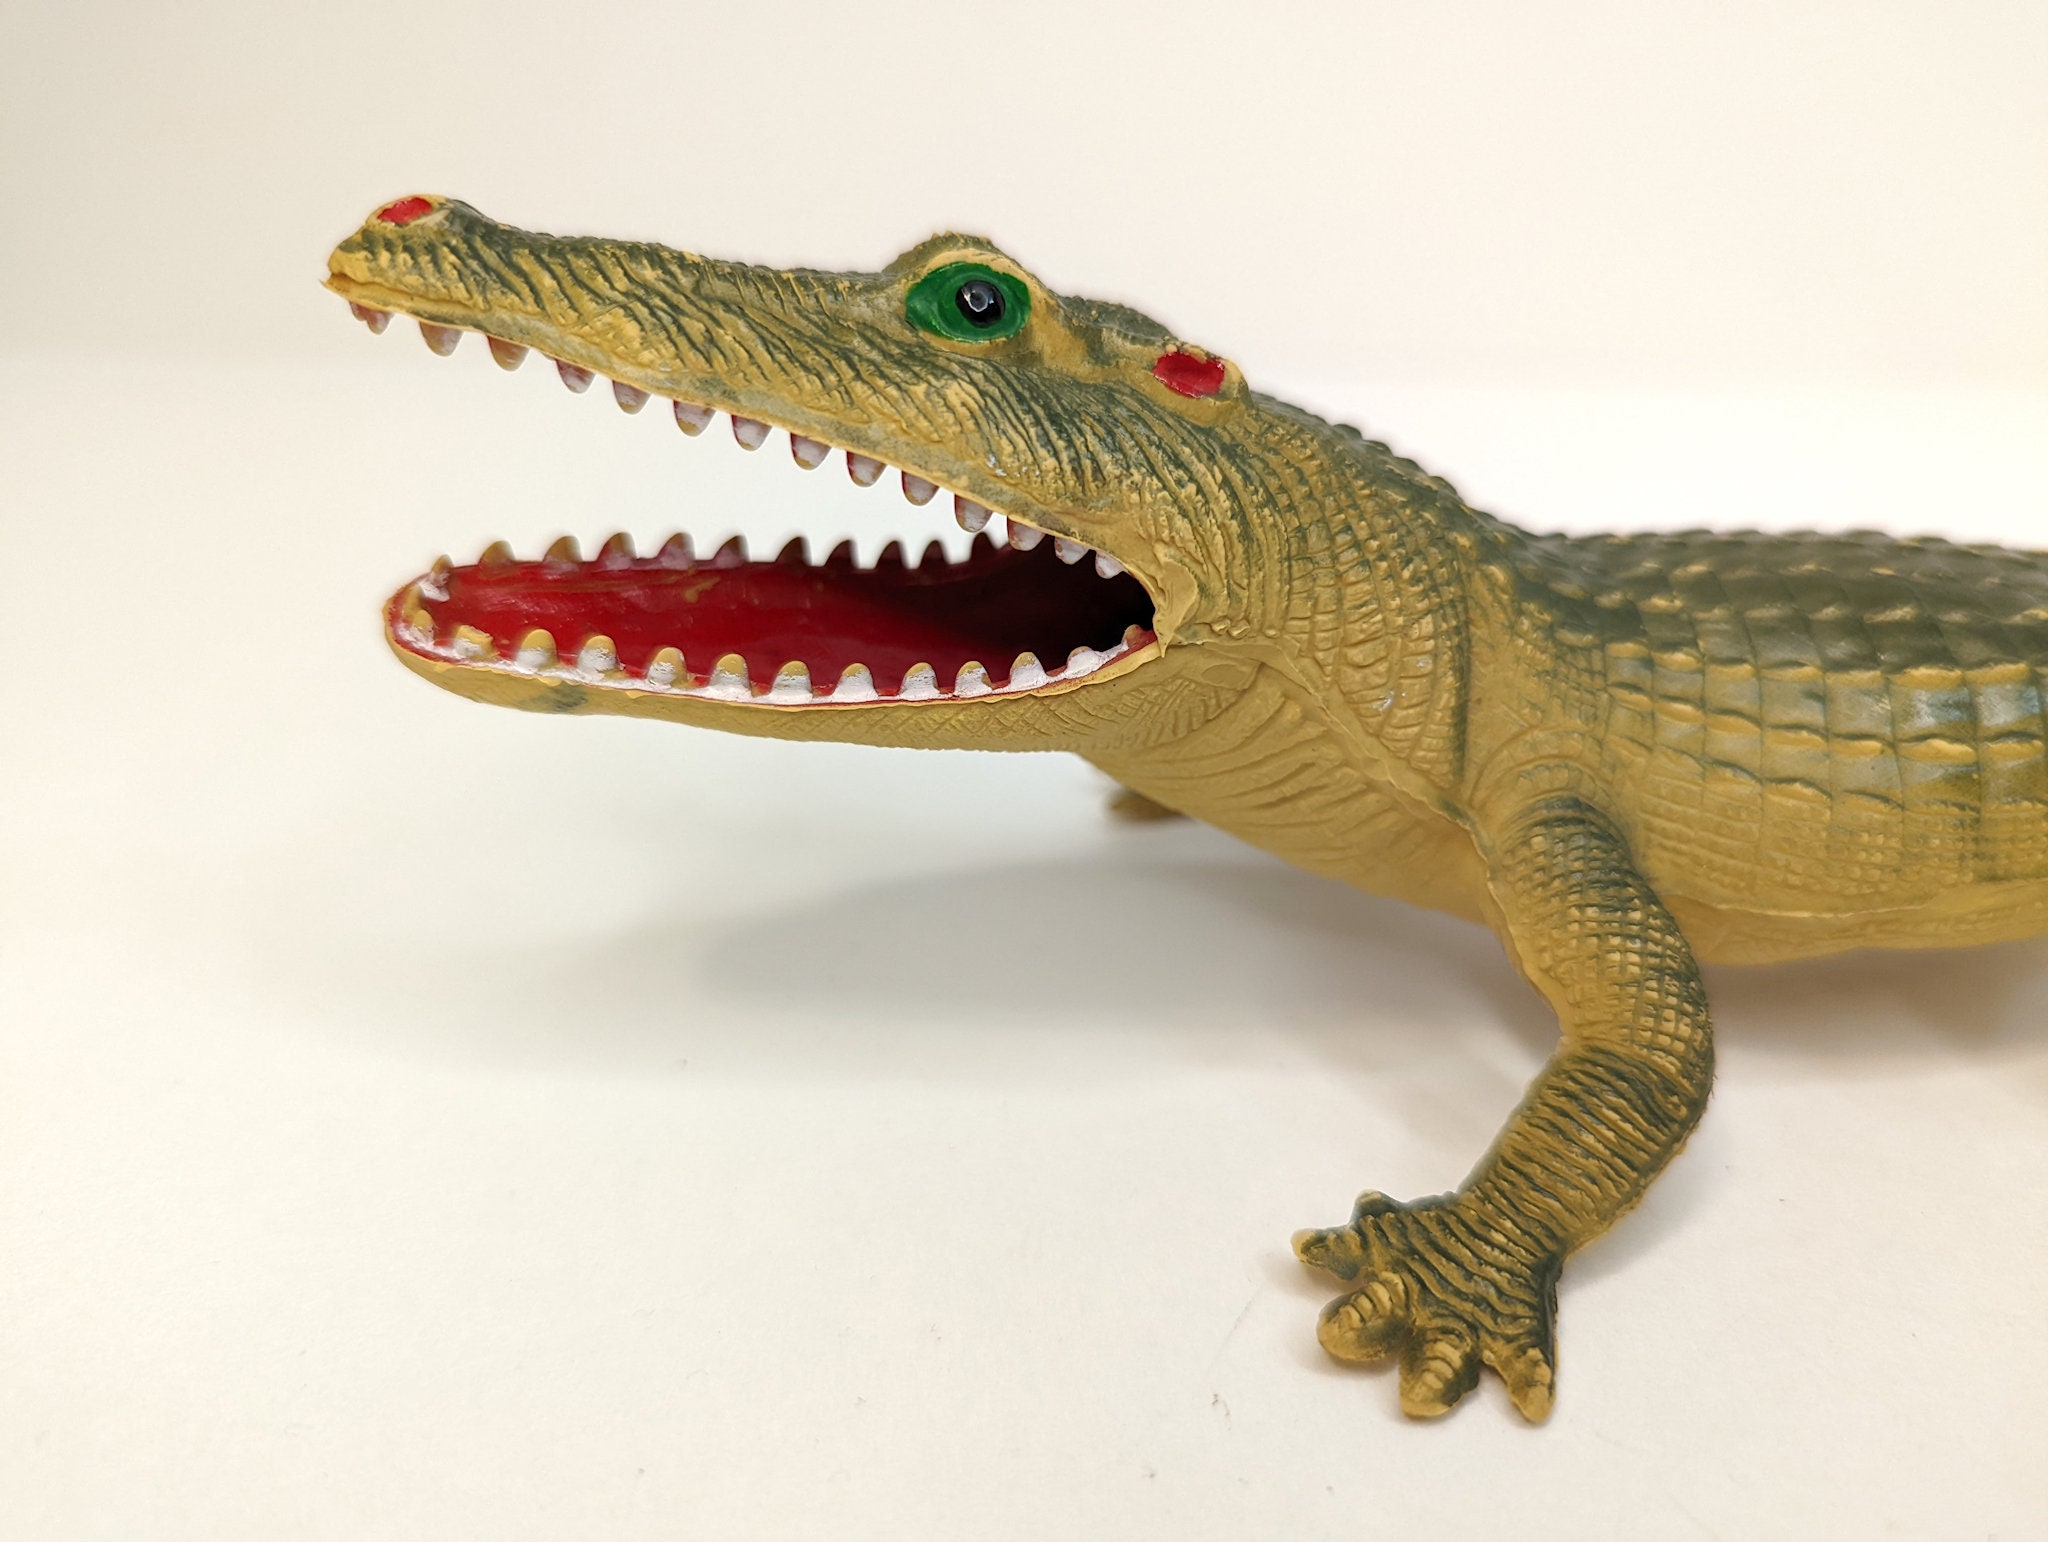 Grand jouet Crocodile Imperial Made in China Plastique en PVC Alligator  Animal Toy -  France